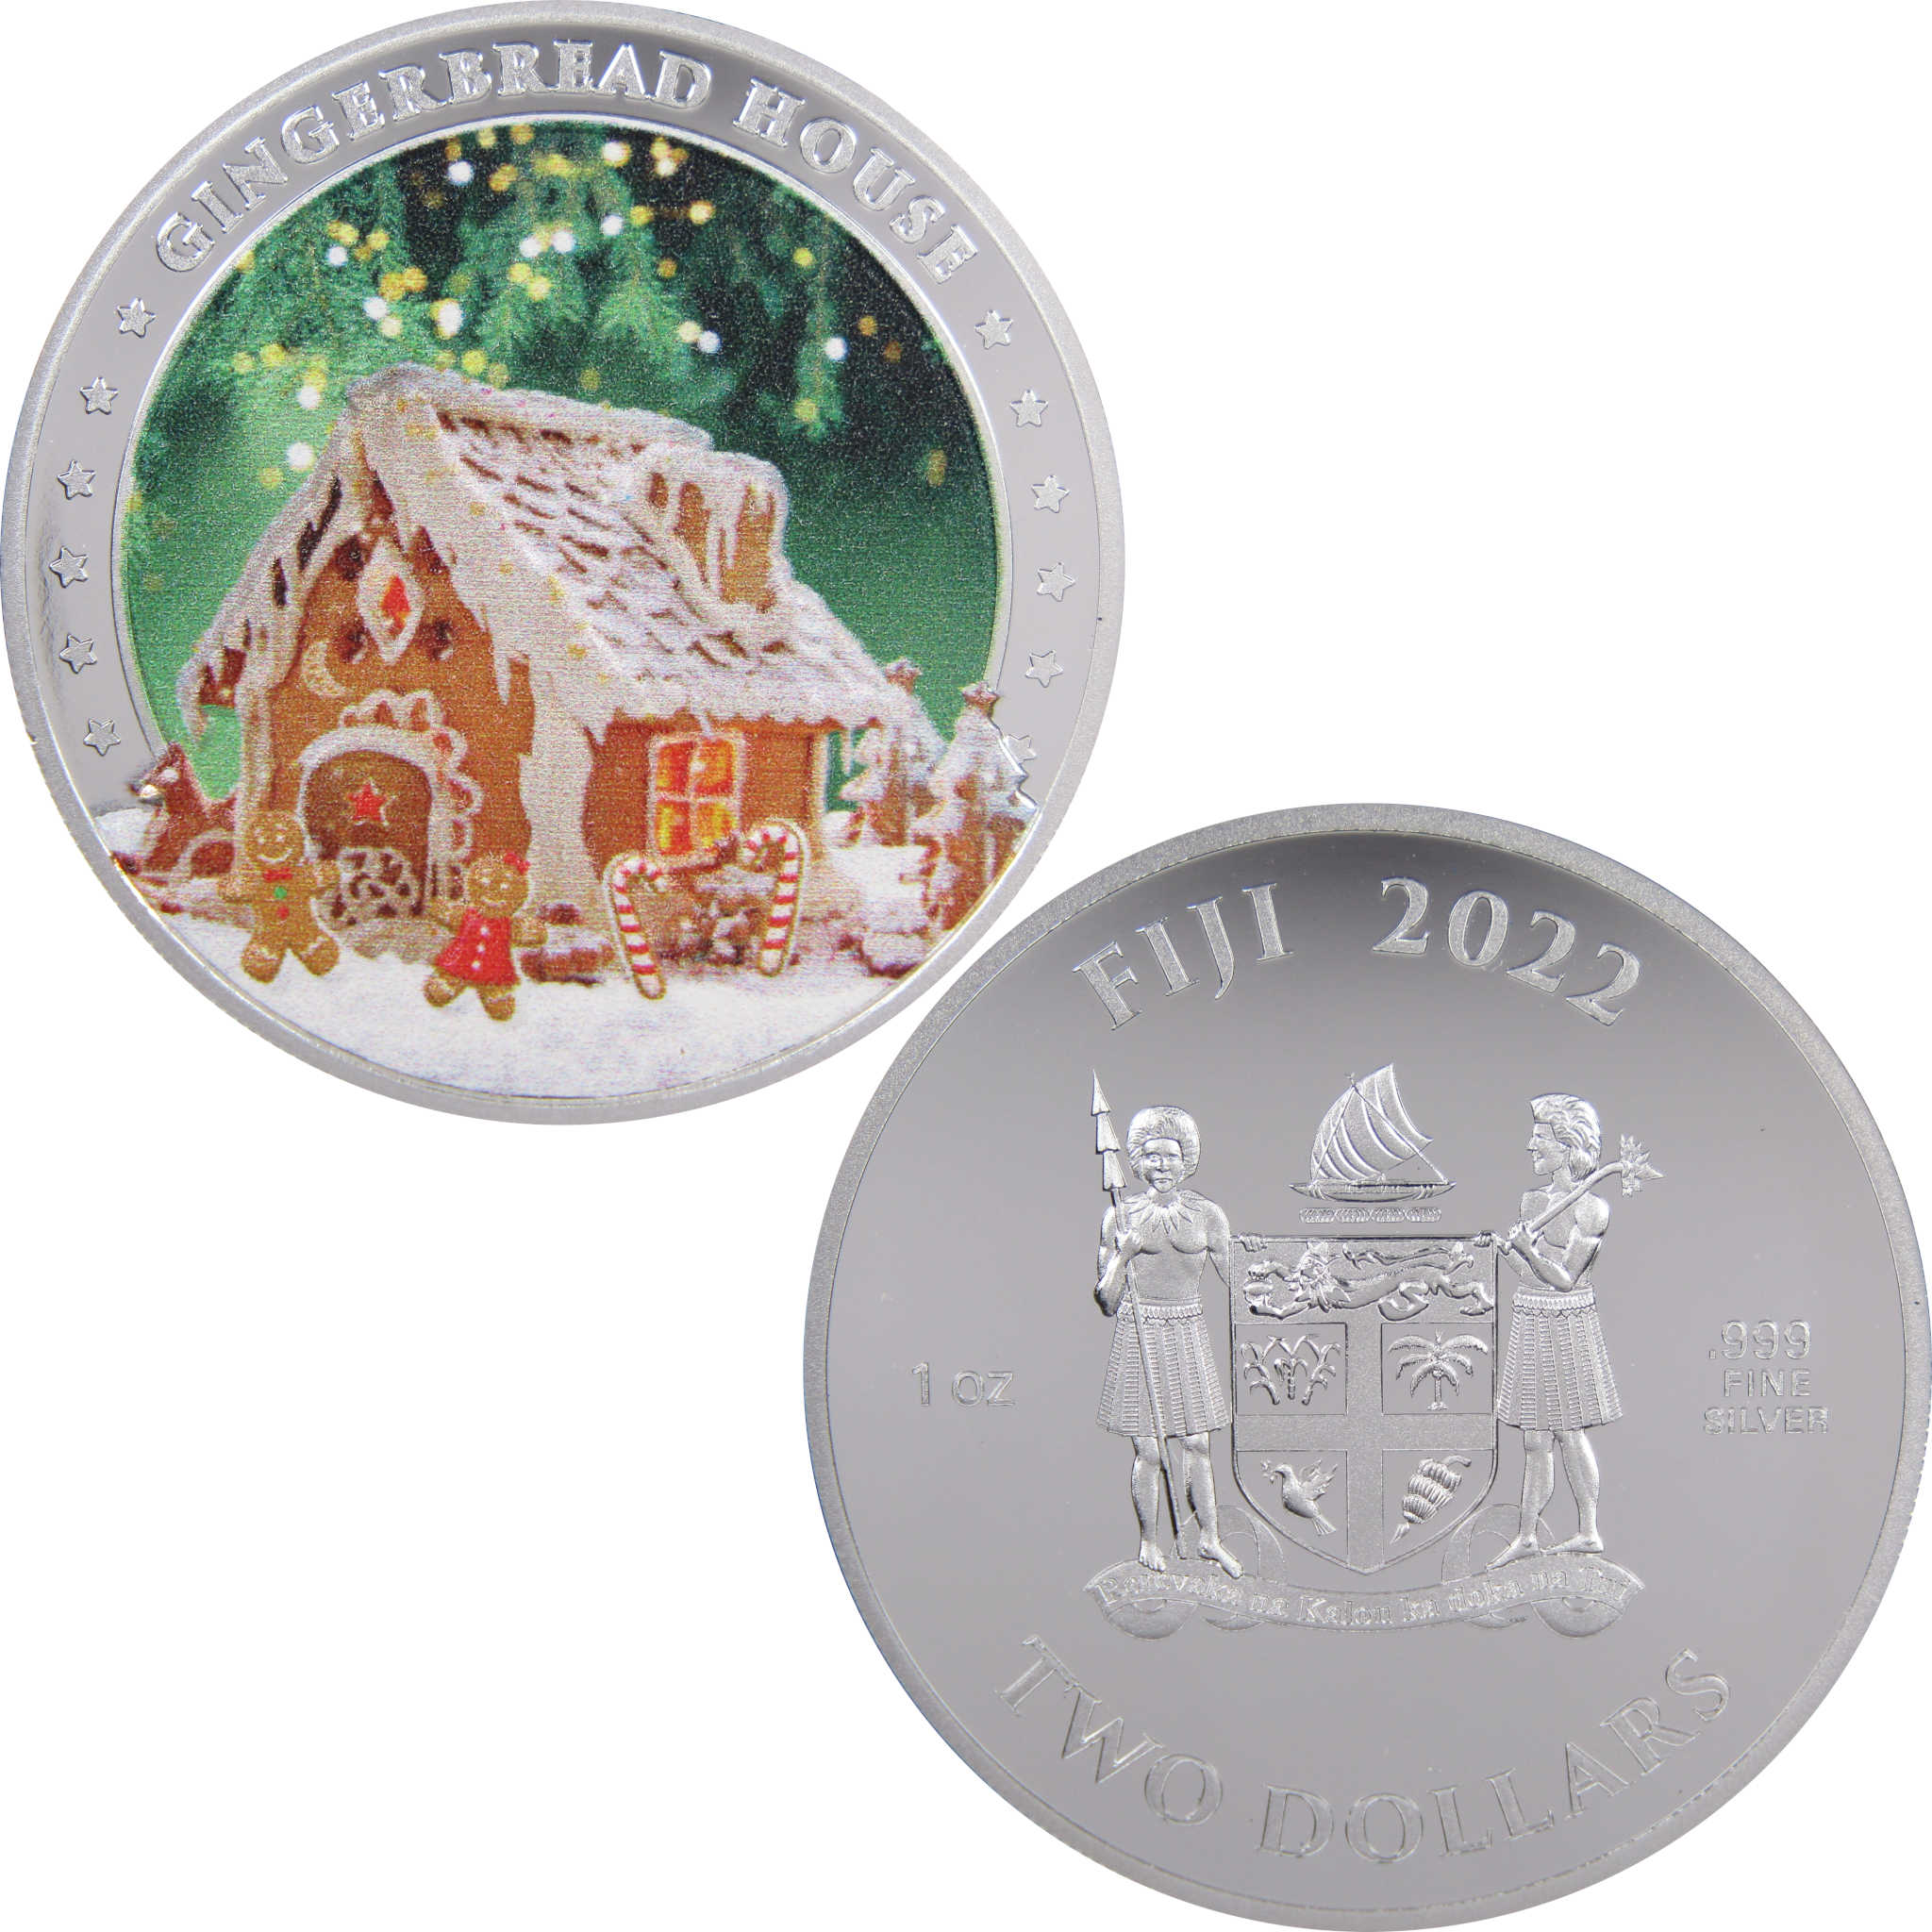 Gingerbread House 1 oz .999 Fine Silver $2 Colorized Proof-like Coin 2022 Fiji